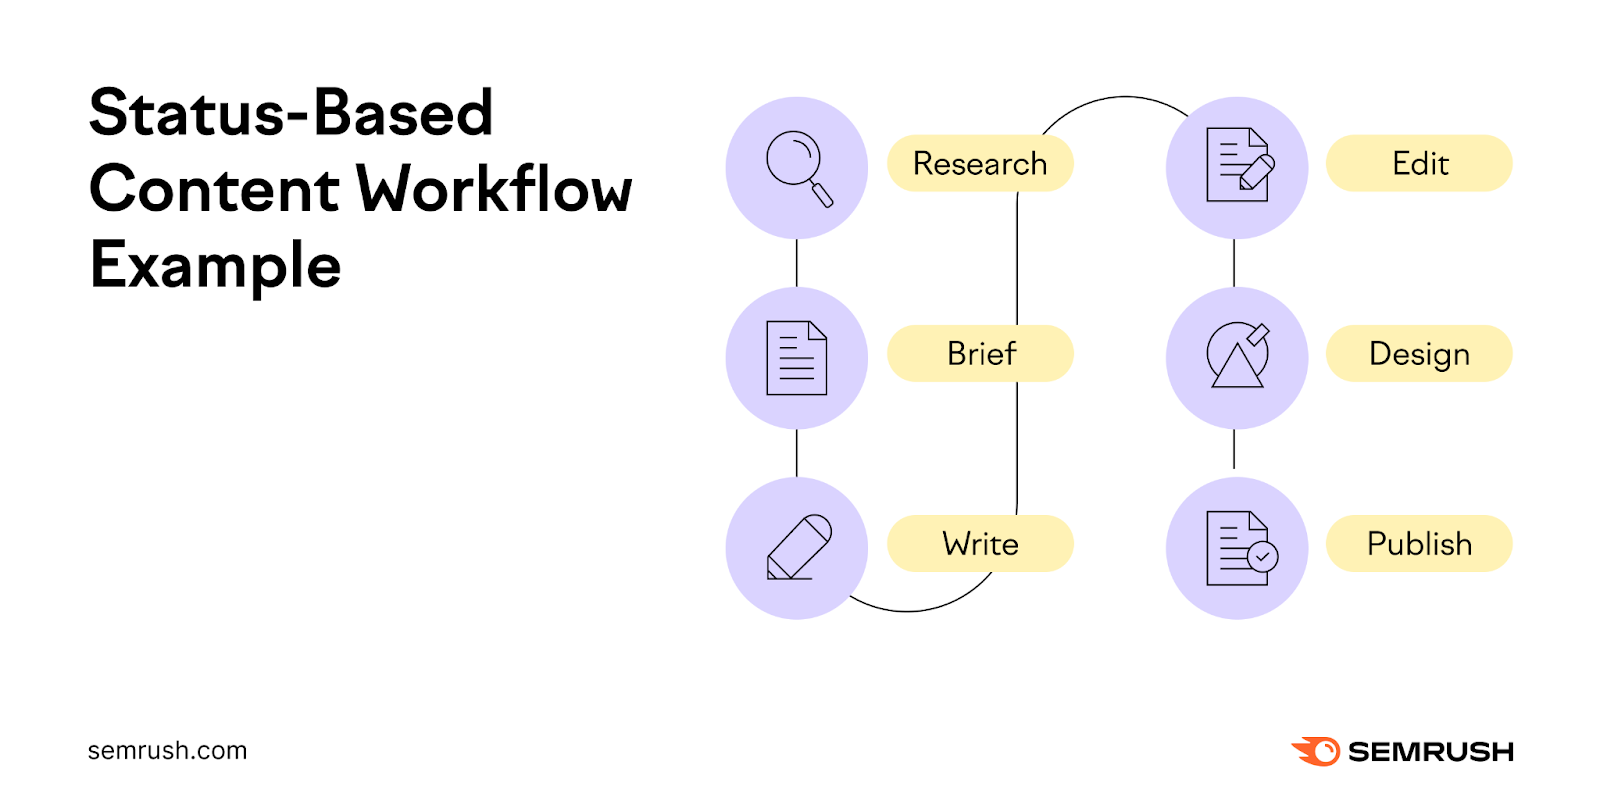 A status-based content workflow template